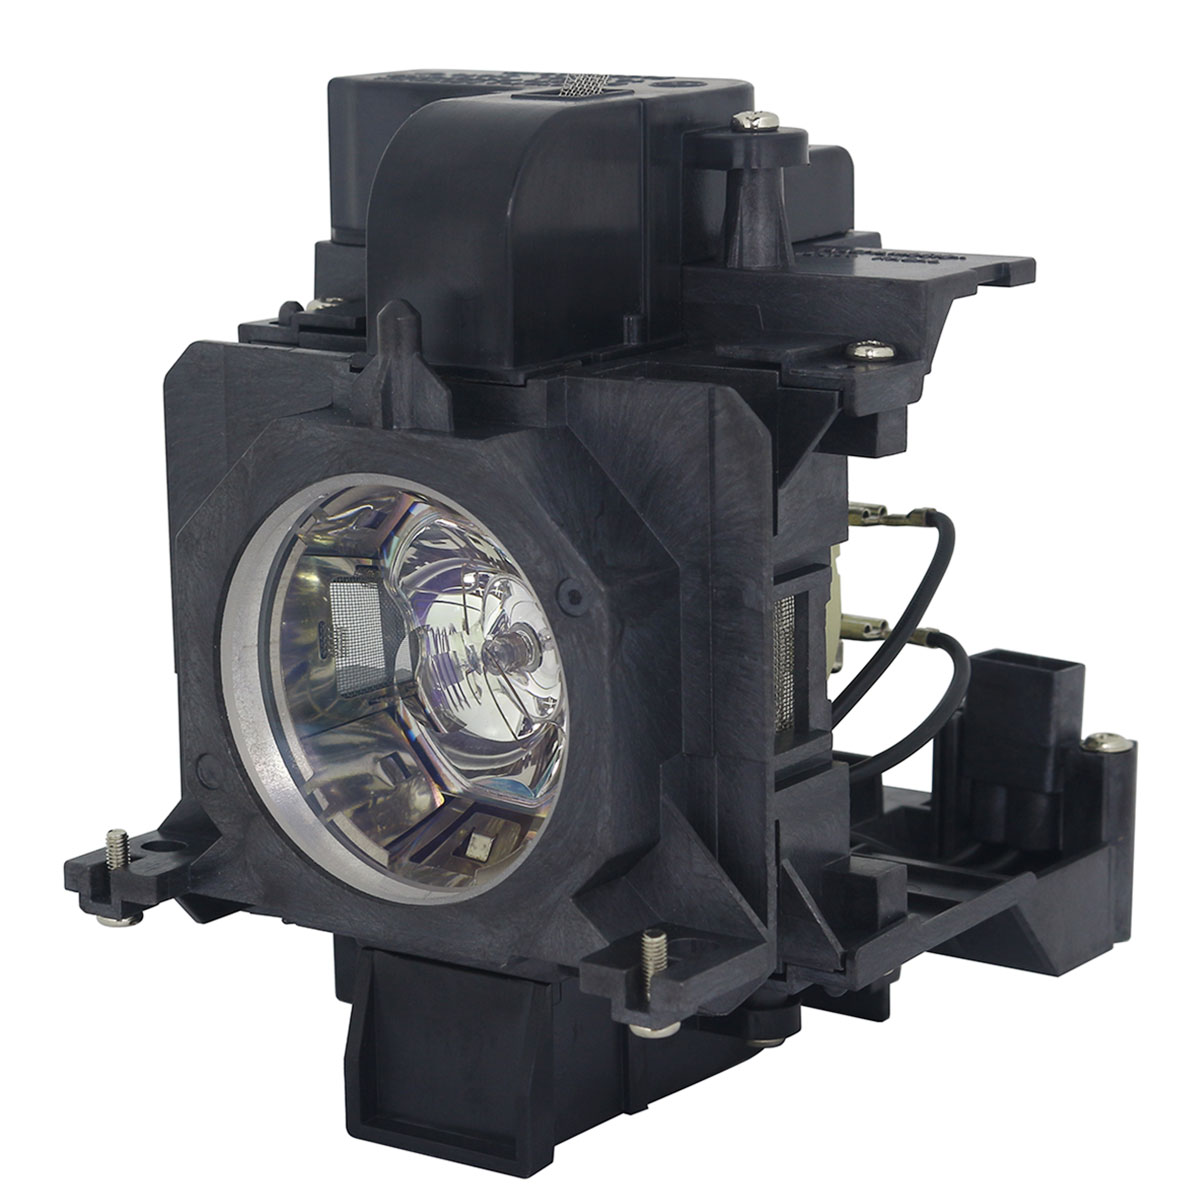 OEM ET-LAE200 Replacement Lamp & Housing for Panasonic Projectors - image 2 of 7